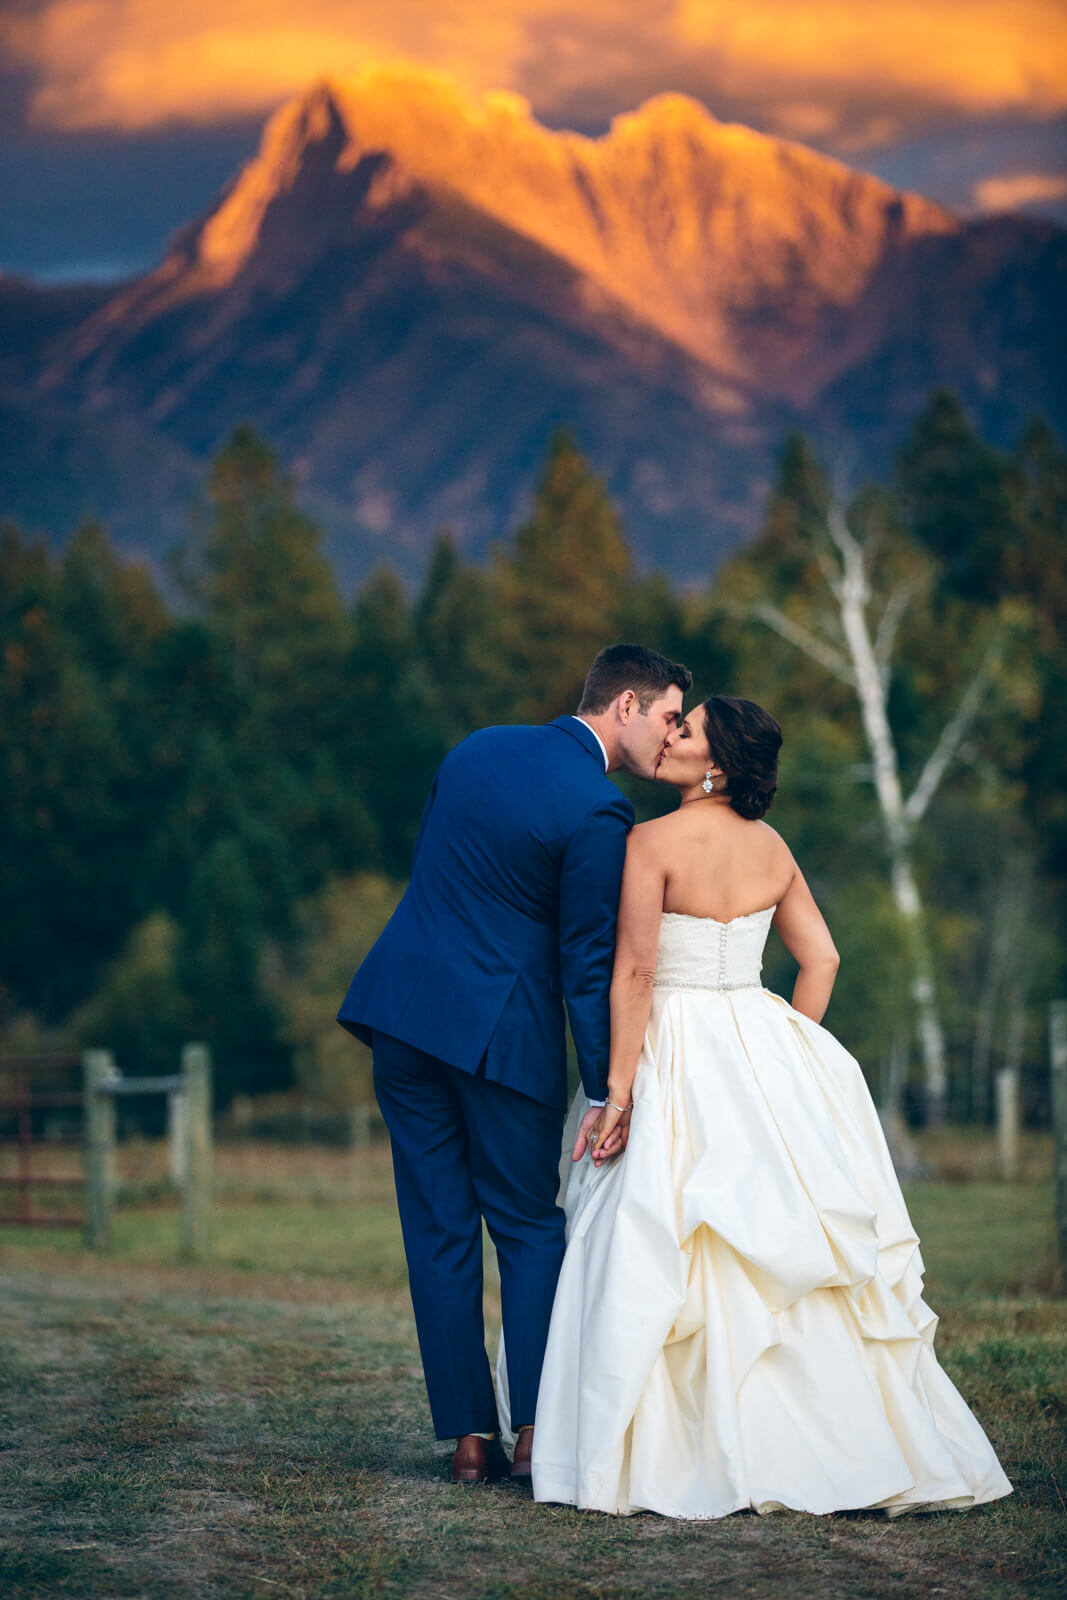 A groom kisses his bride in front of mountains during sunset at their wedding at Sky Ridge Ranch in Ronan Montana. 